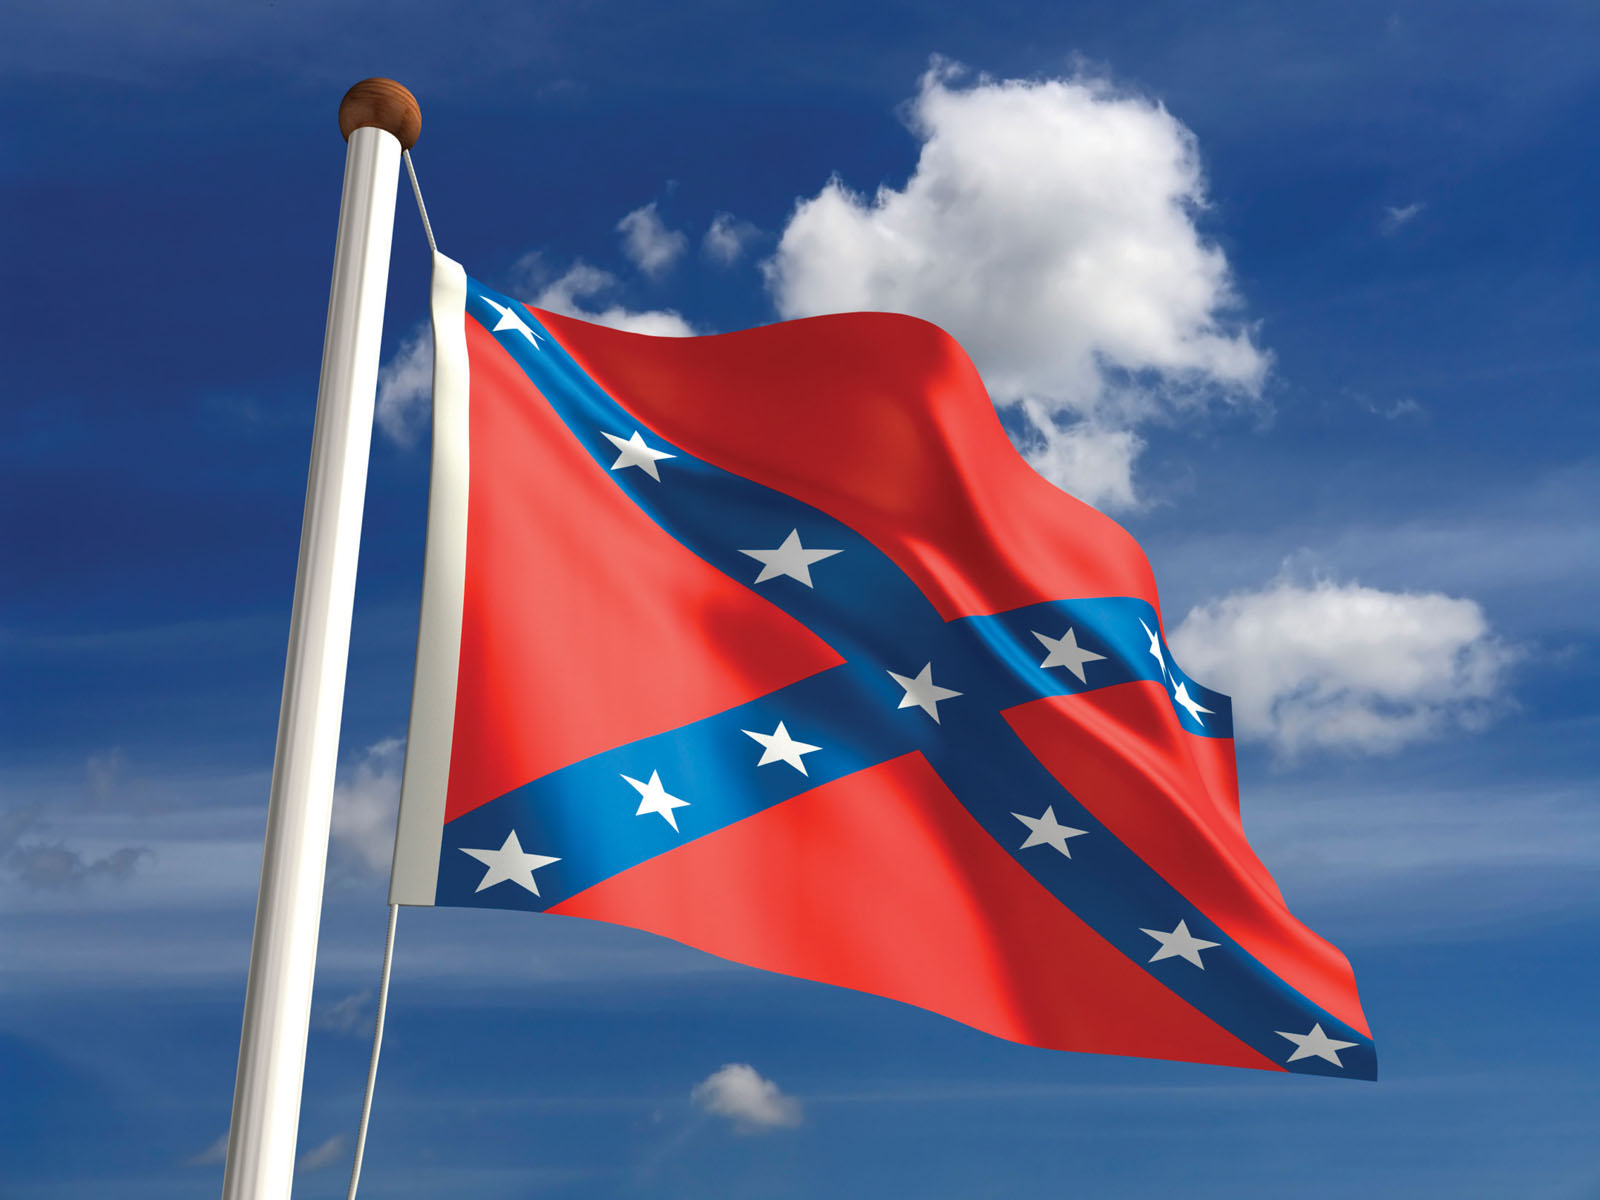 Rebel Flag Wallpapers | Wallpapers, Backgrounds, Images, Art Photos.